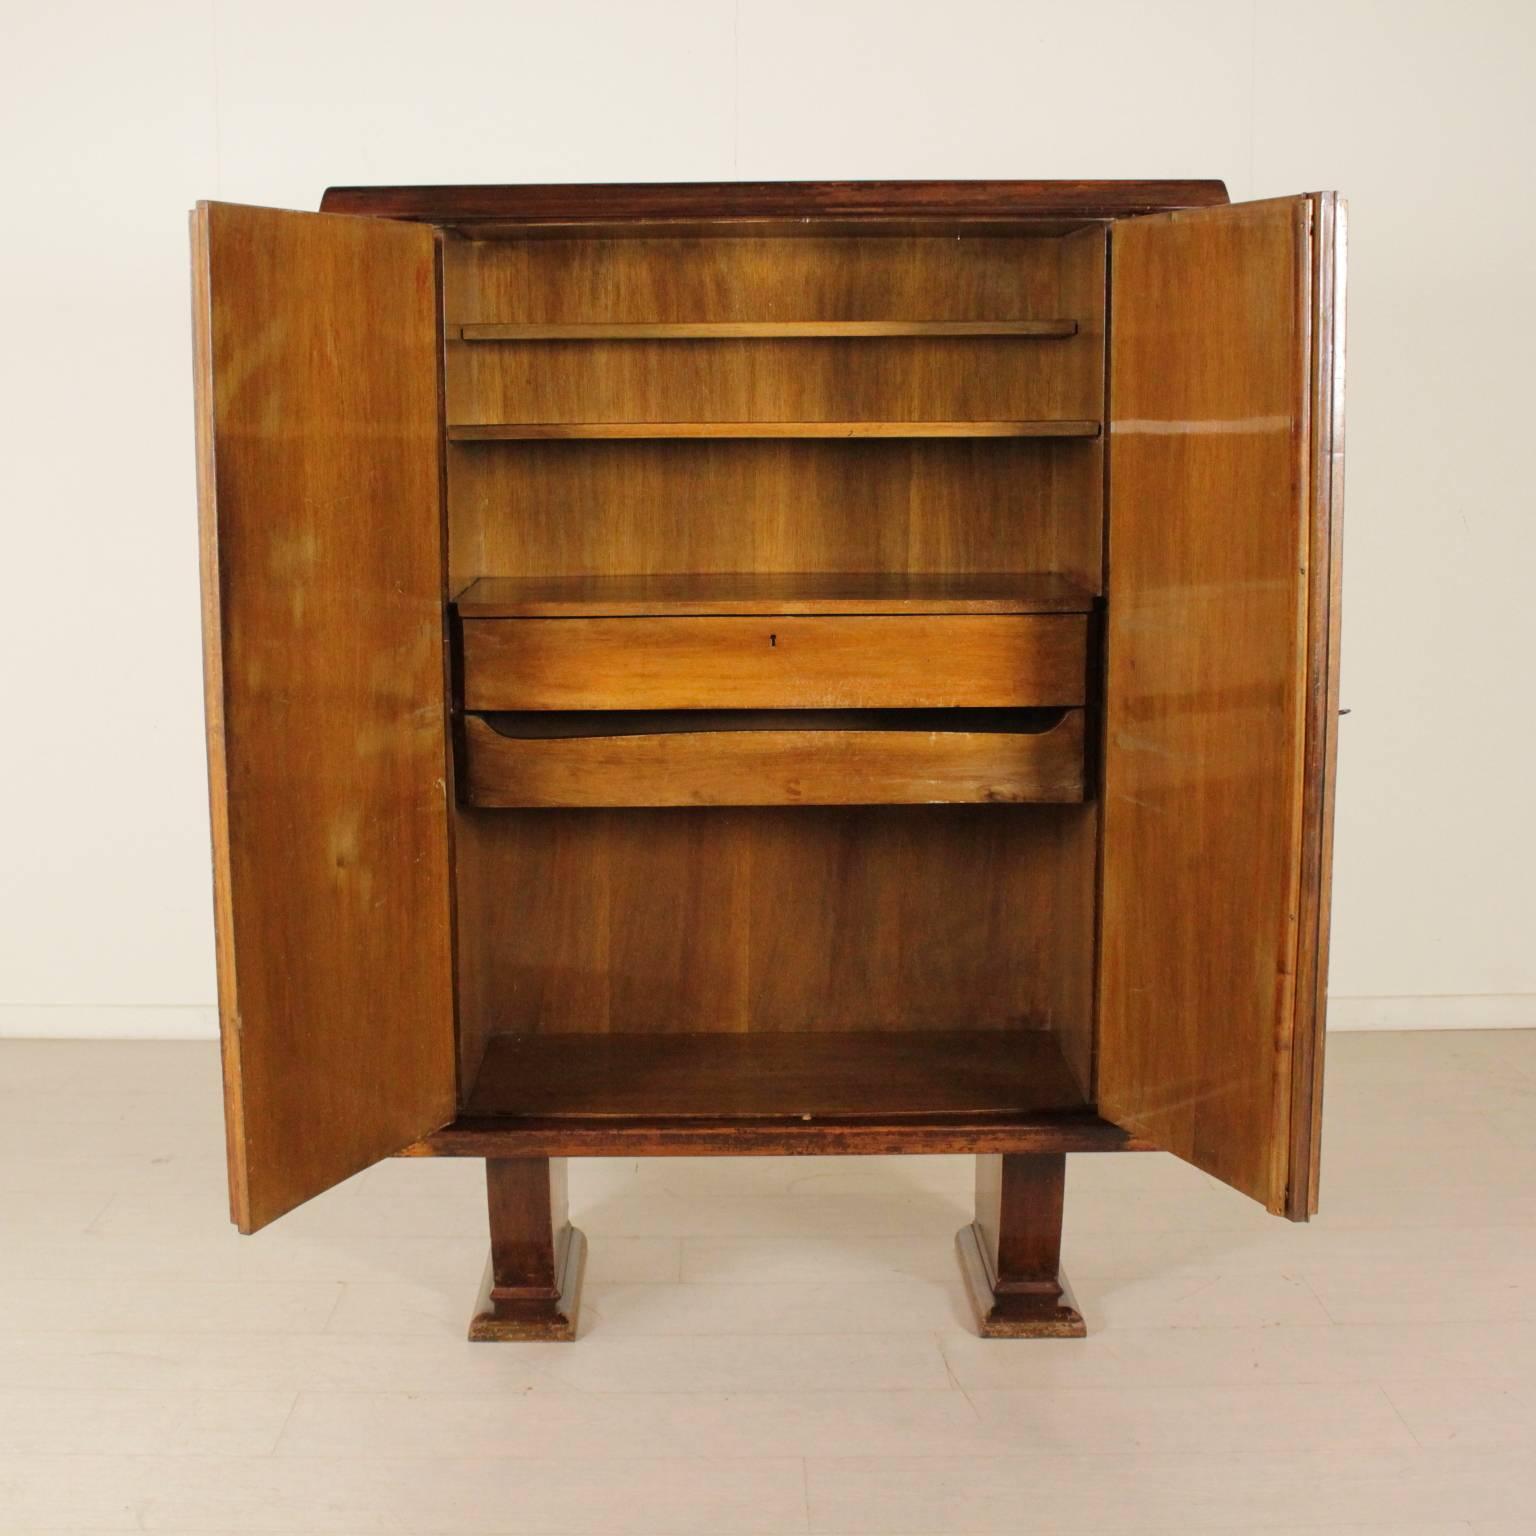 A cabinet, walnut veneer, decorated sides, birch veneered doors with various essences inlaid decorations. Manufactured in Italy, 1940s-1950s.